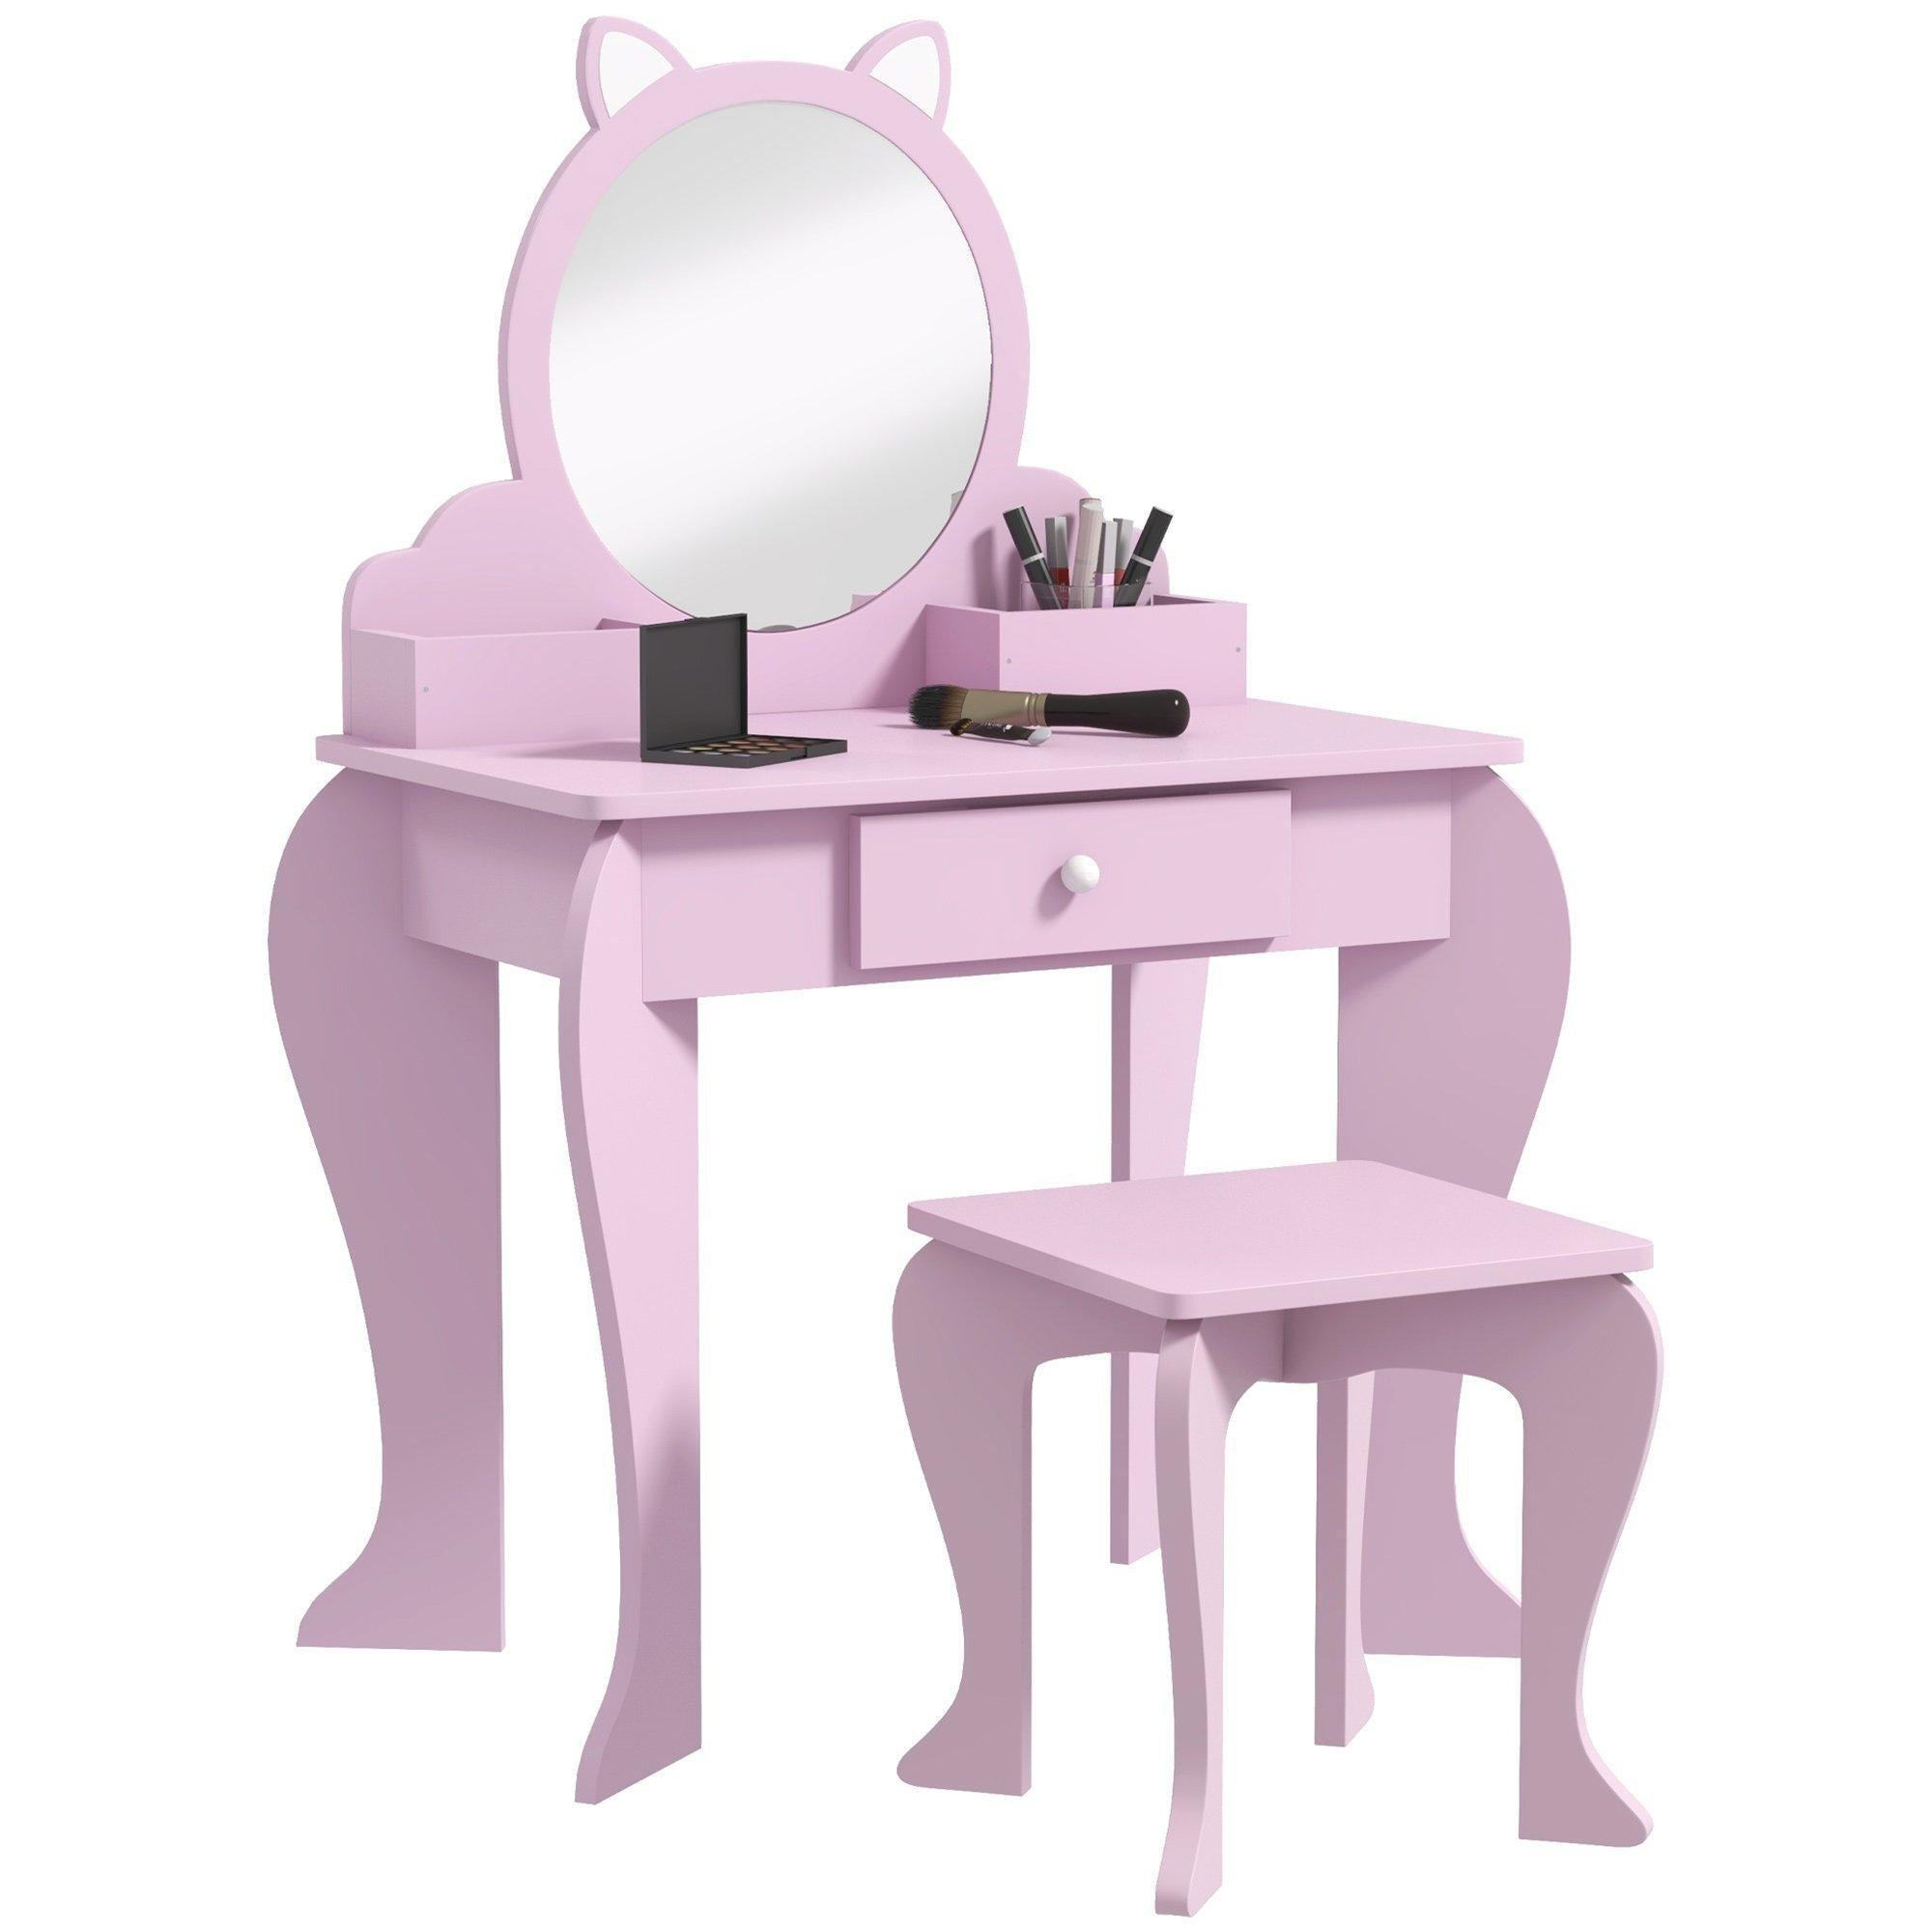 Dressing Table with Mirror and Stool, Drawer, Storage Boxes, Cat Design - image 1